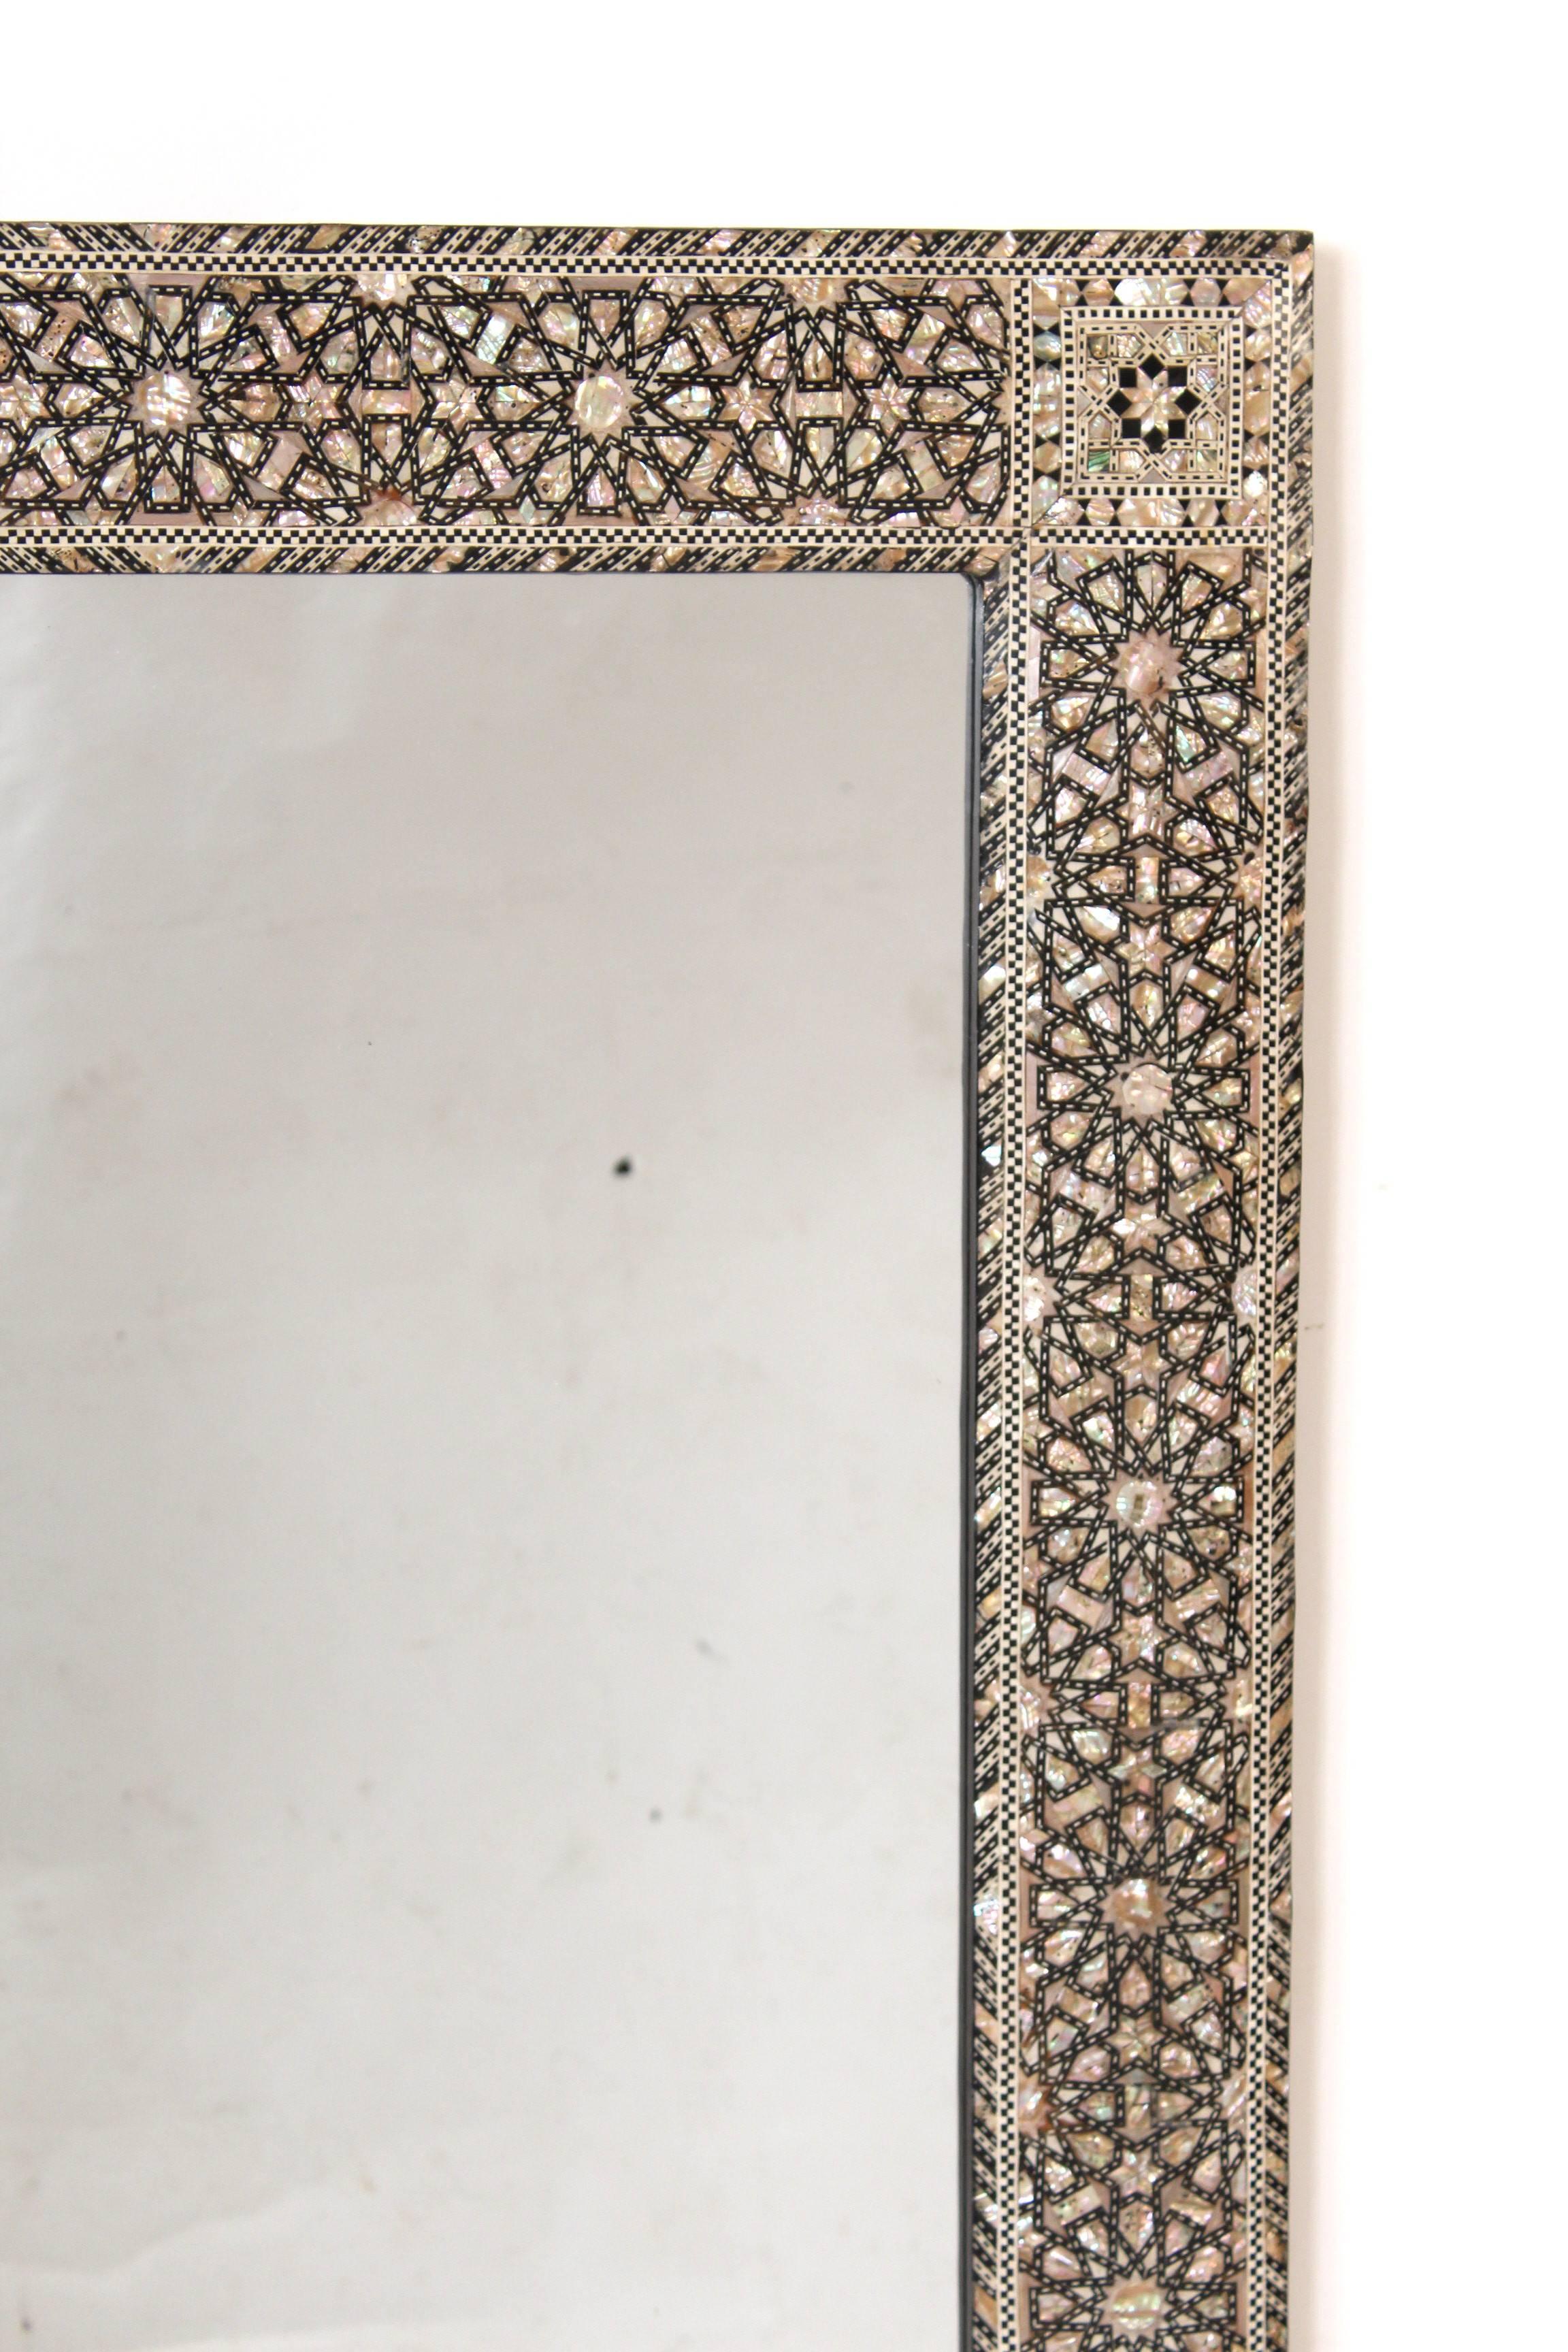 Syrian Middle Eastern Mother-of-Pearl Inlaid Mirror